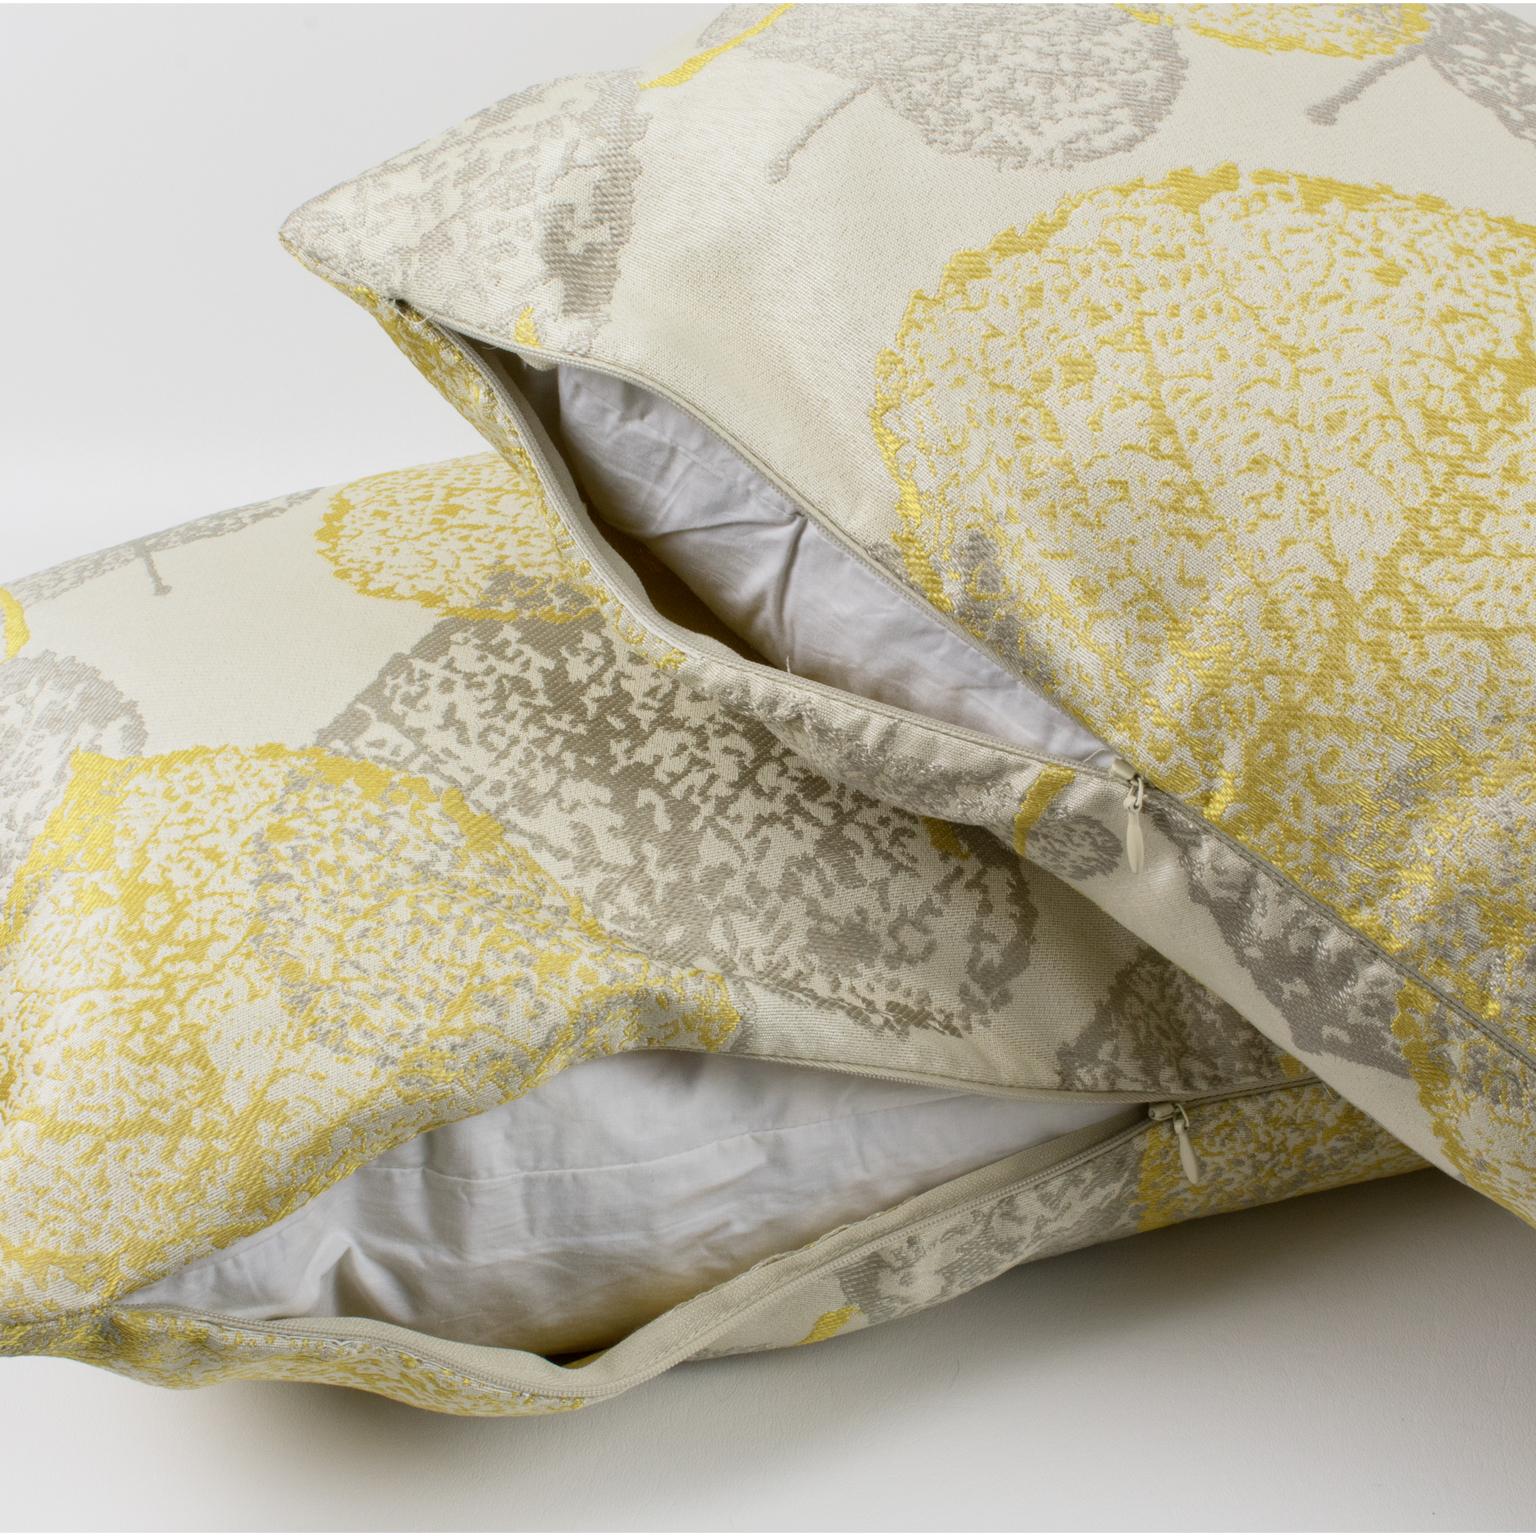 Modern Silver Gray and Yellow Damask Throw Pillows, a pair For Sale